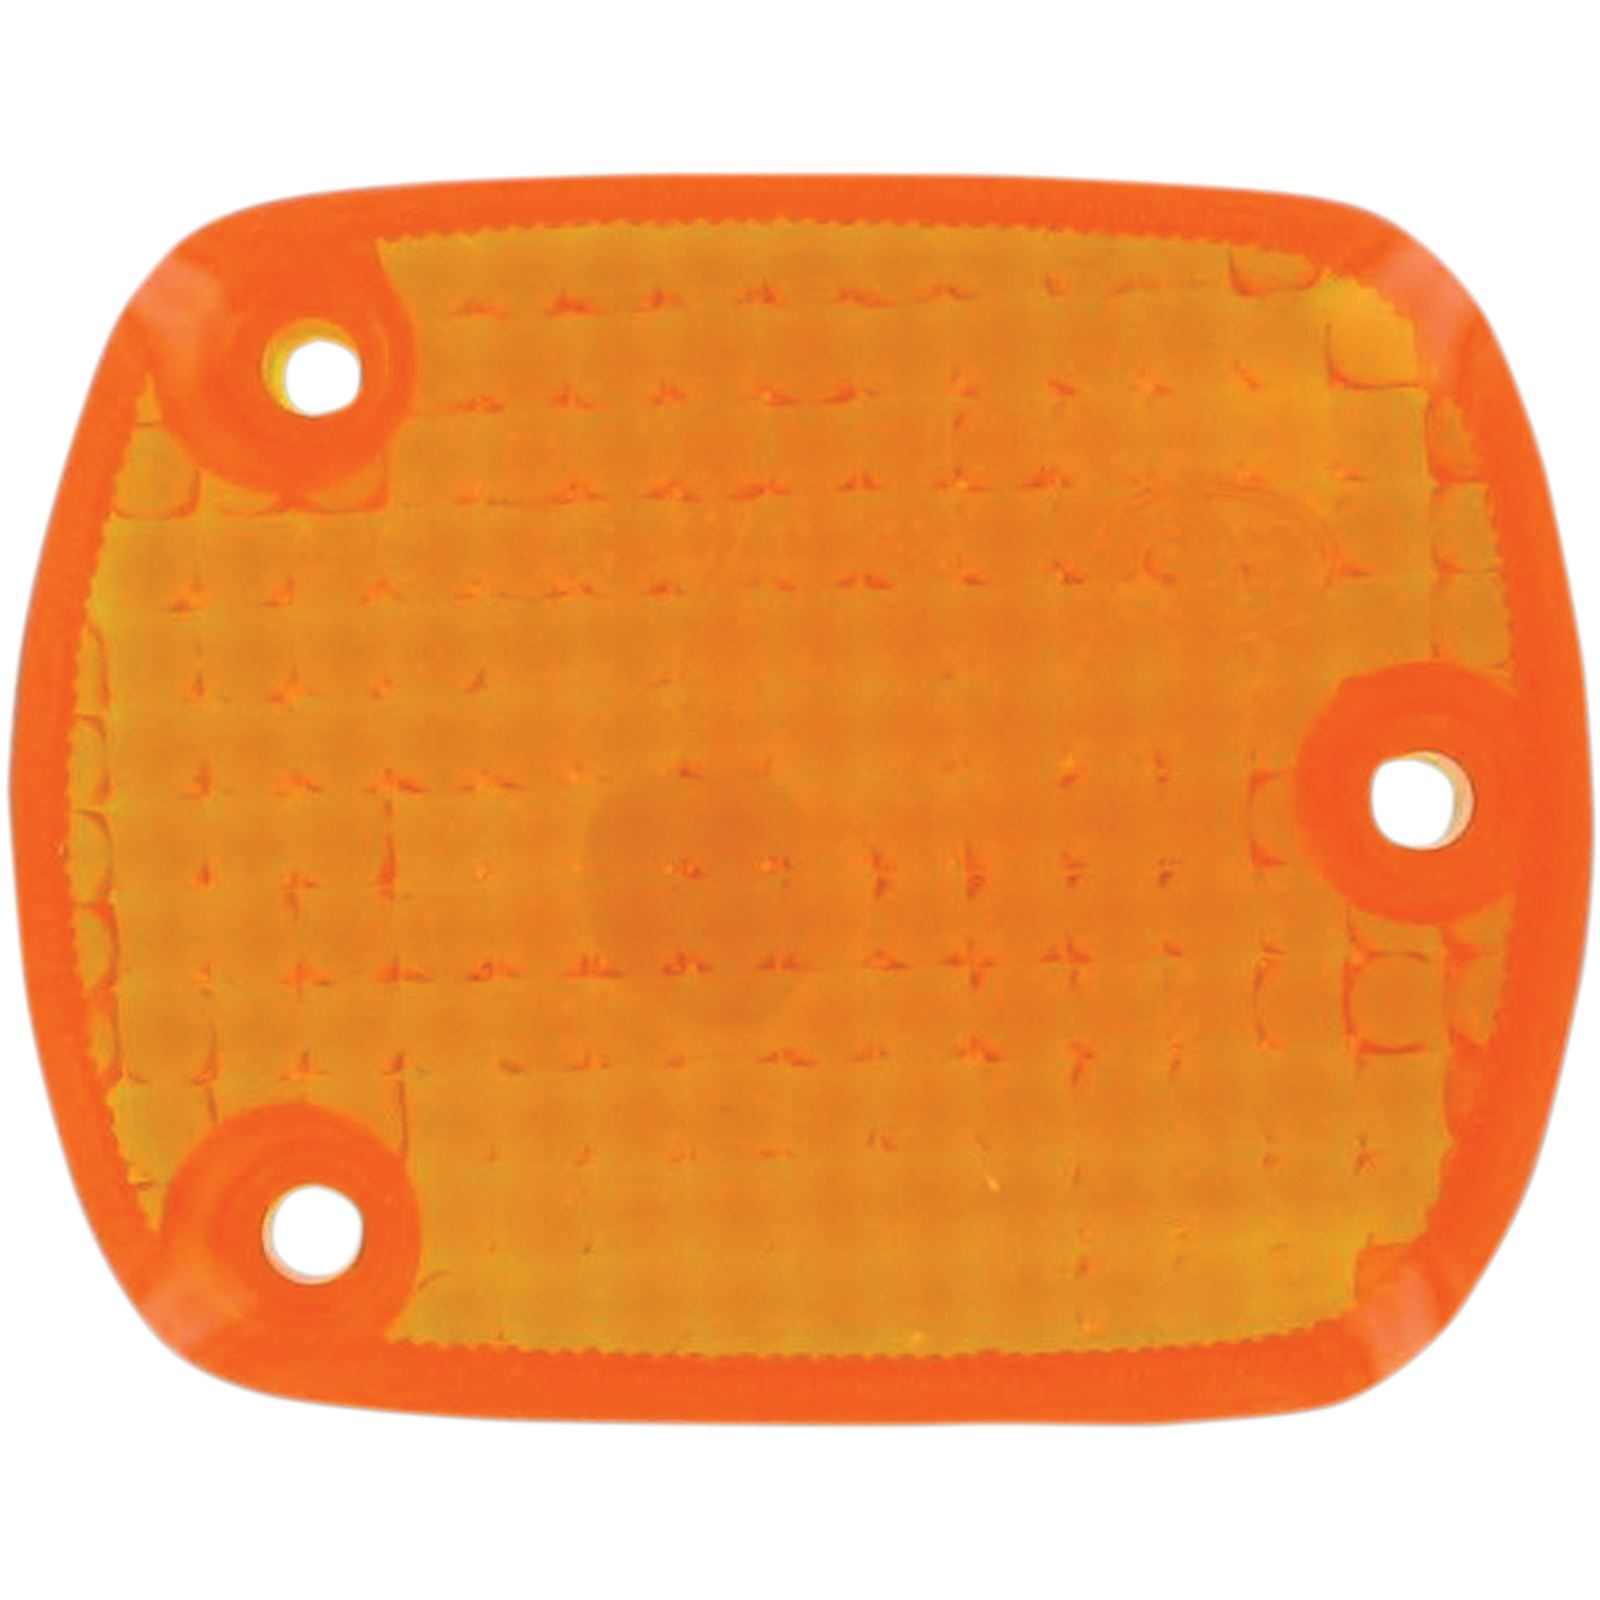 K S Replacement Turn Signal Lens - Amber